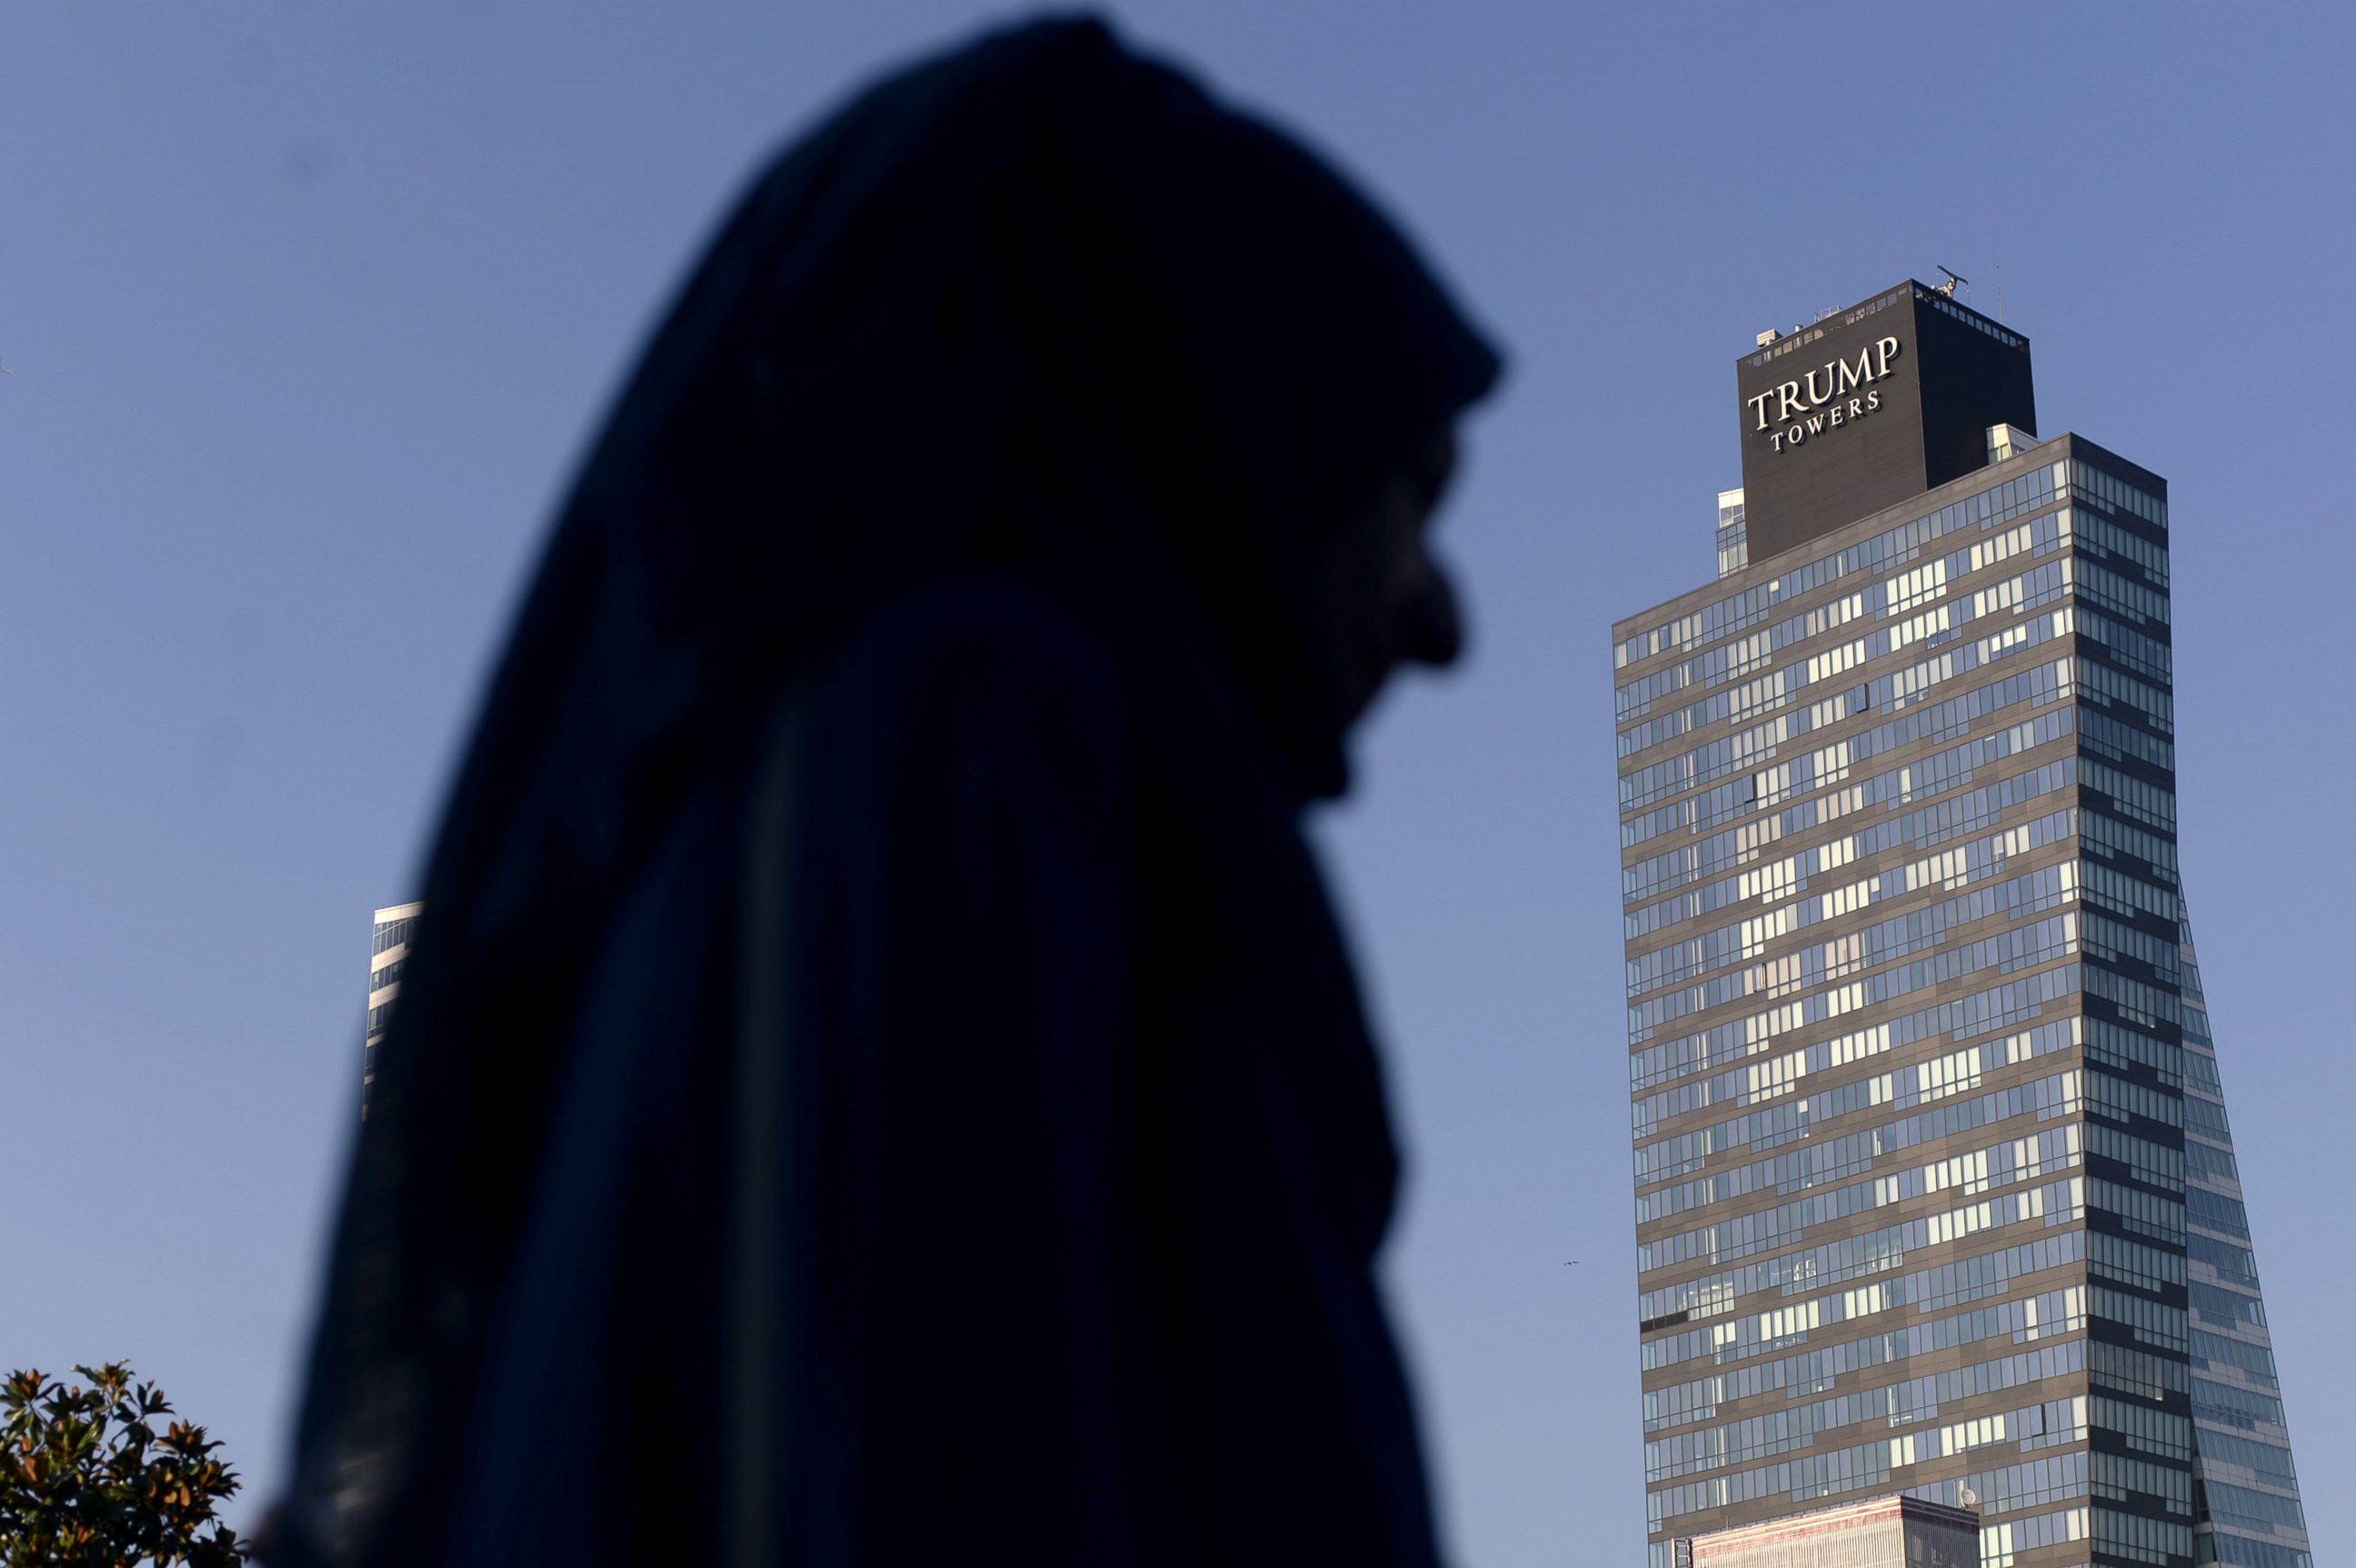 PHOTO: A woman walks past the Trump Towers building in Istanbul on July 30, 2015.